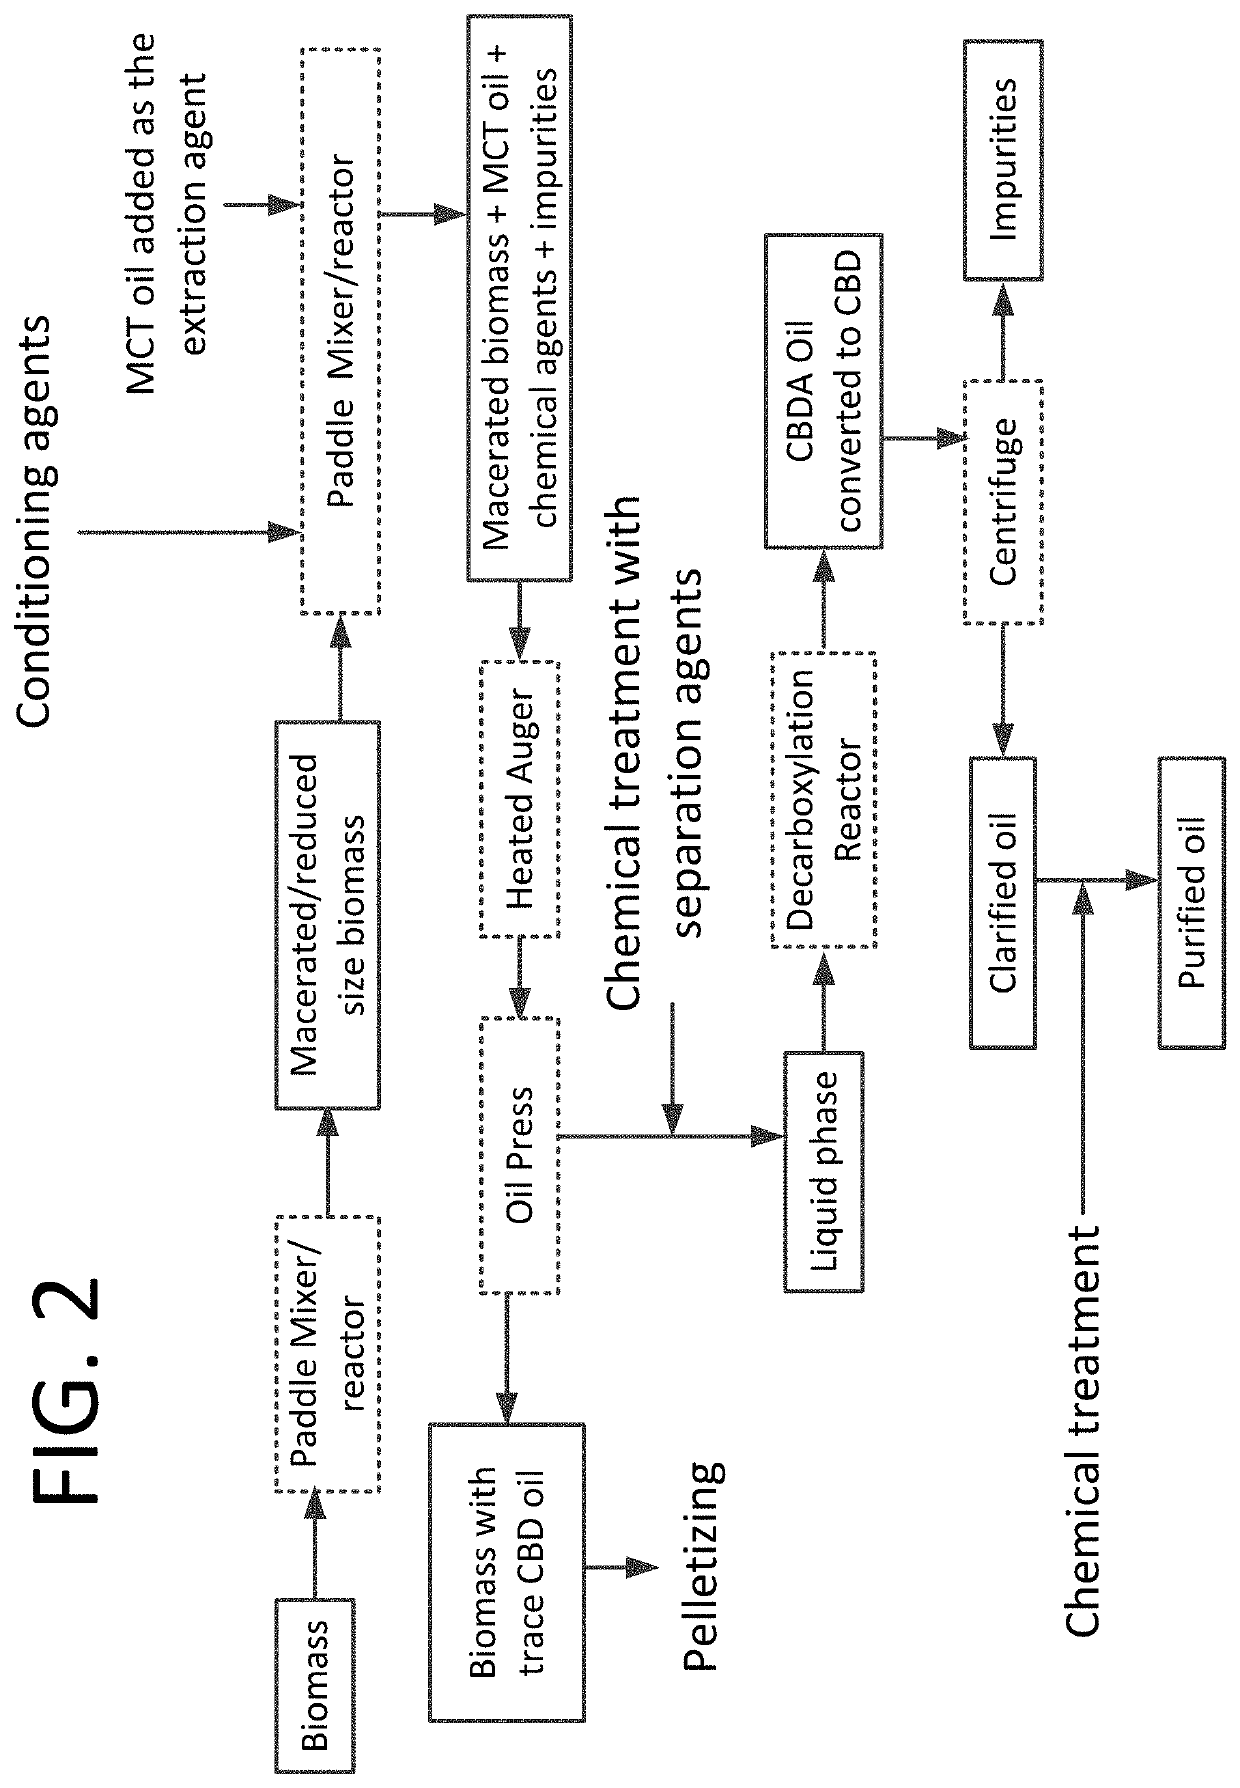 Process for manufacturing cannabidiol